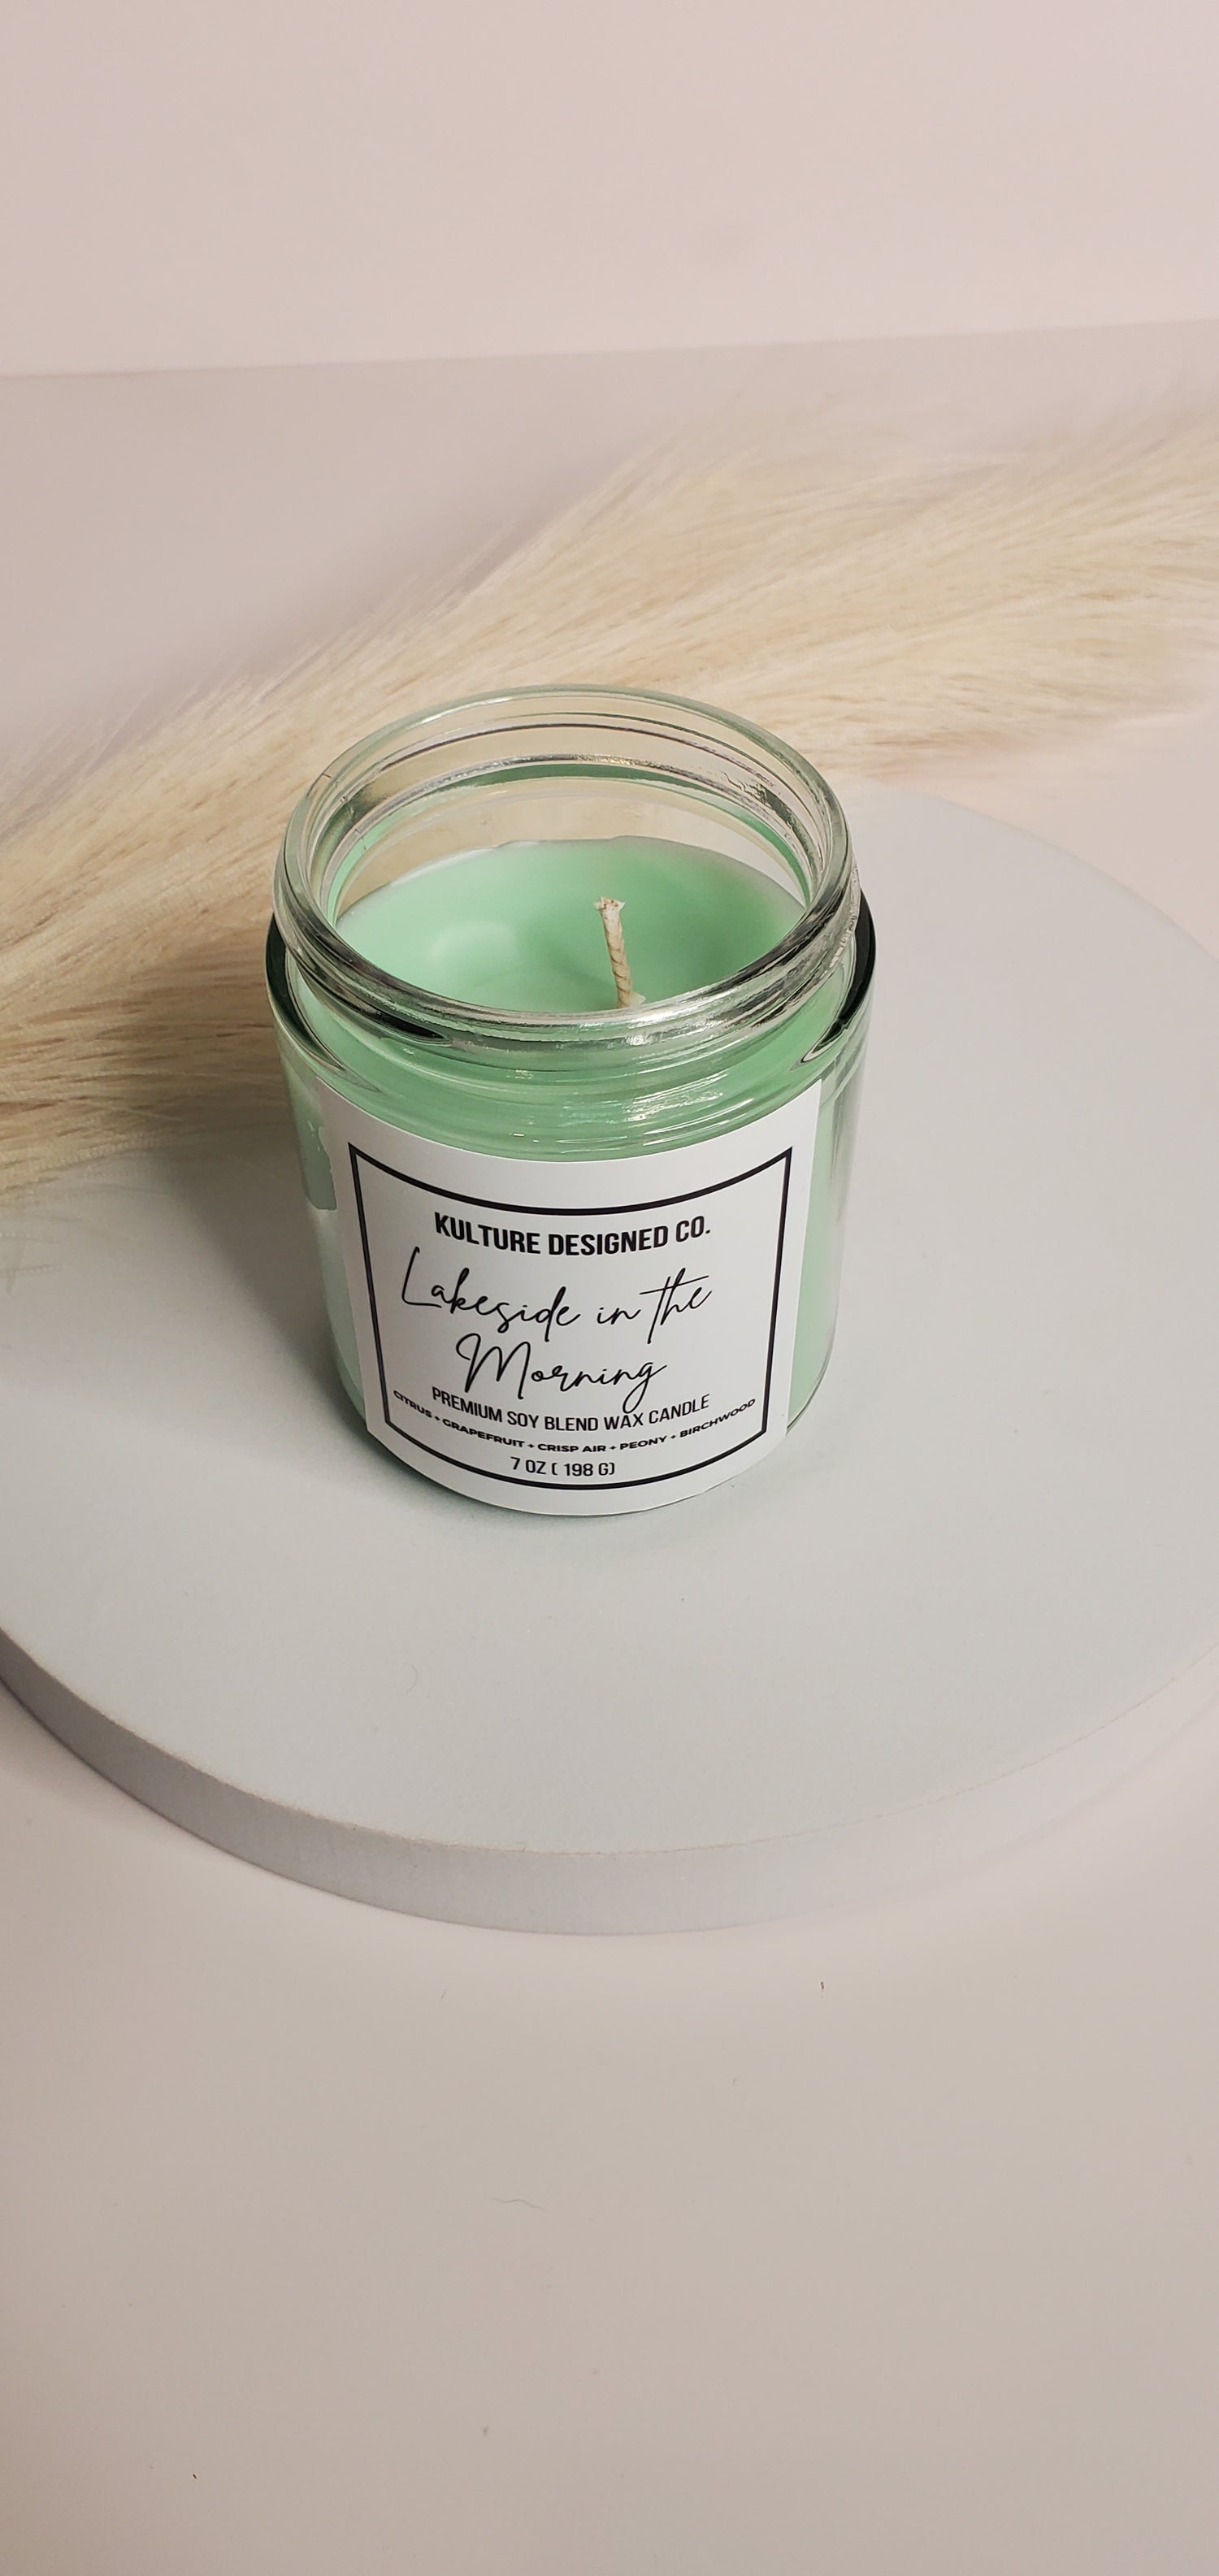 LAKESIDE IN THE MORNING |  7 oz  Candle - Kulture Designed Co.